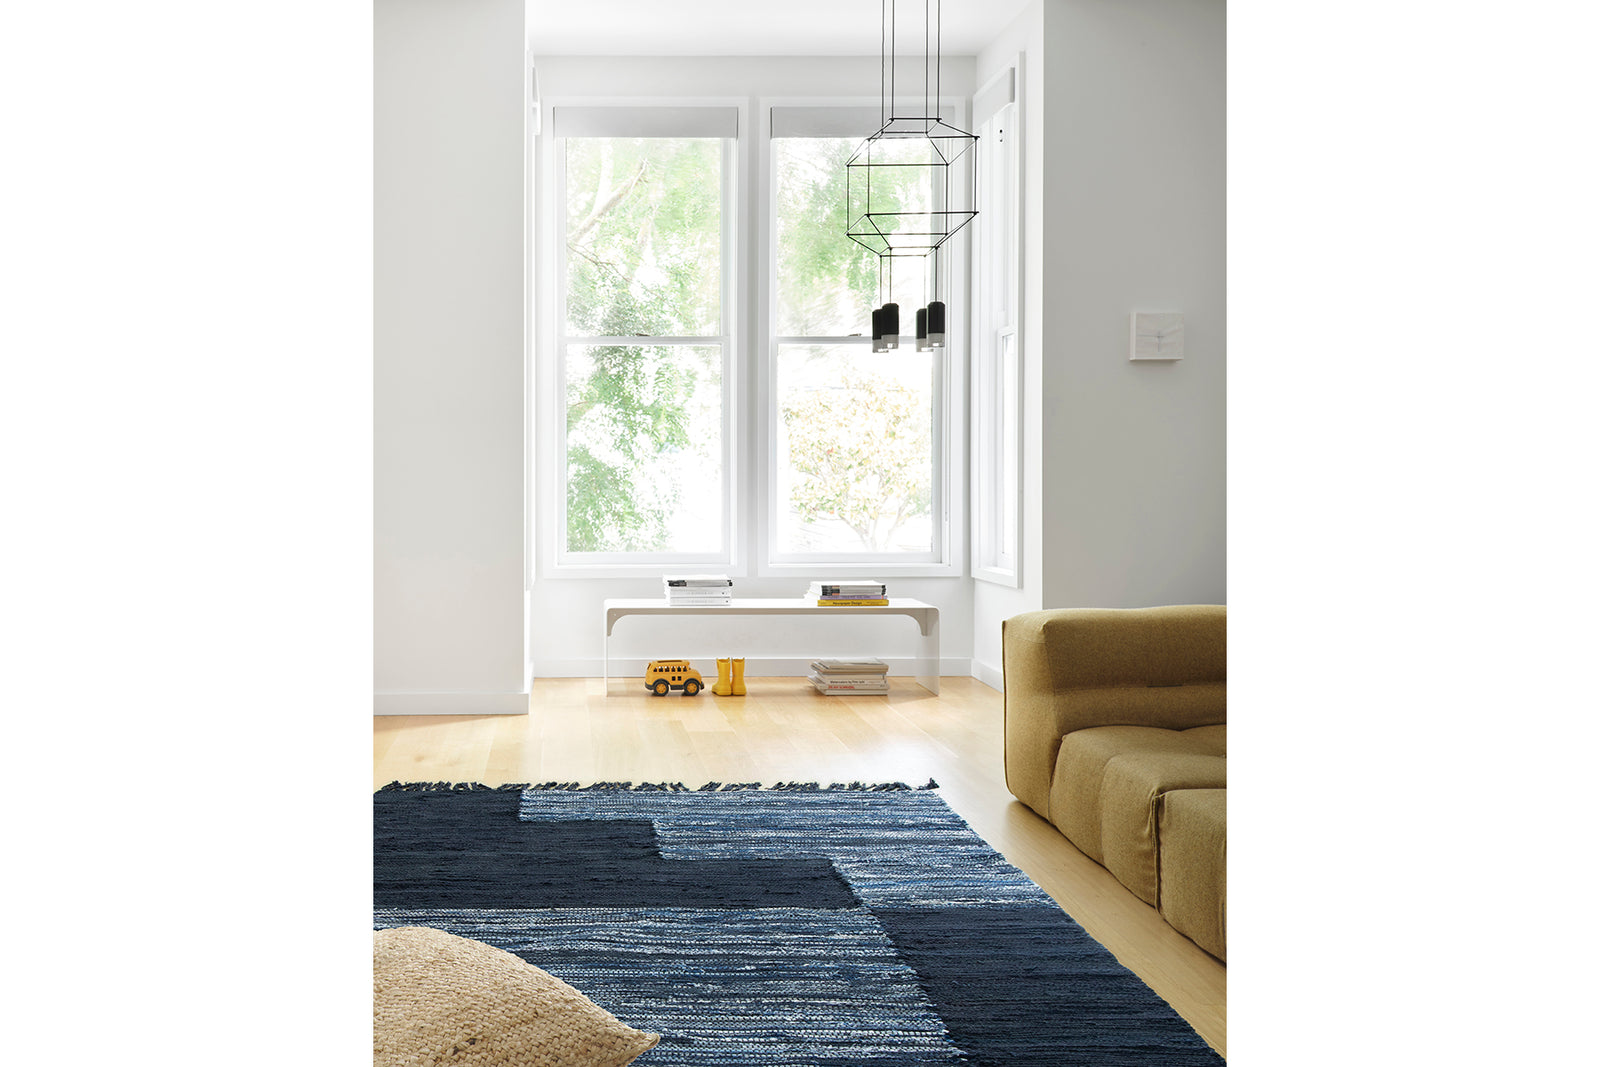 Machine Washable Rug of Recycled Denim, Navy Blue - Topstitch - Revival™